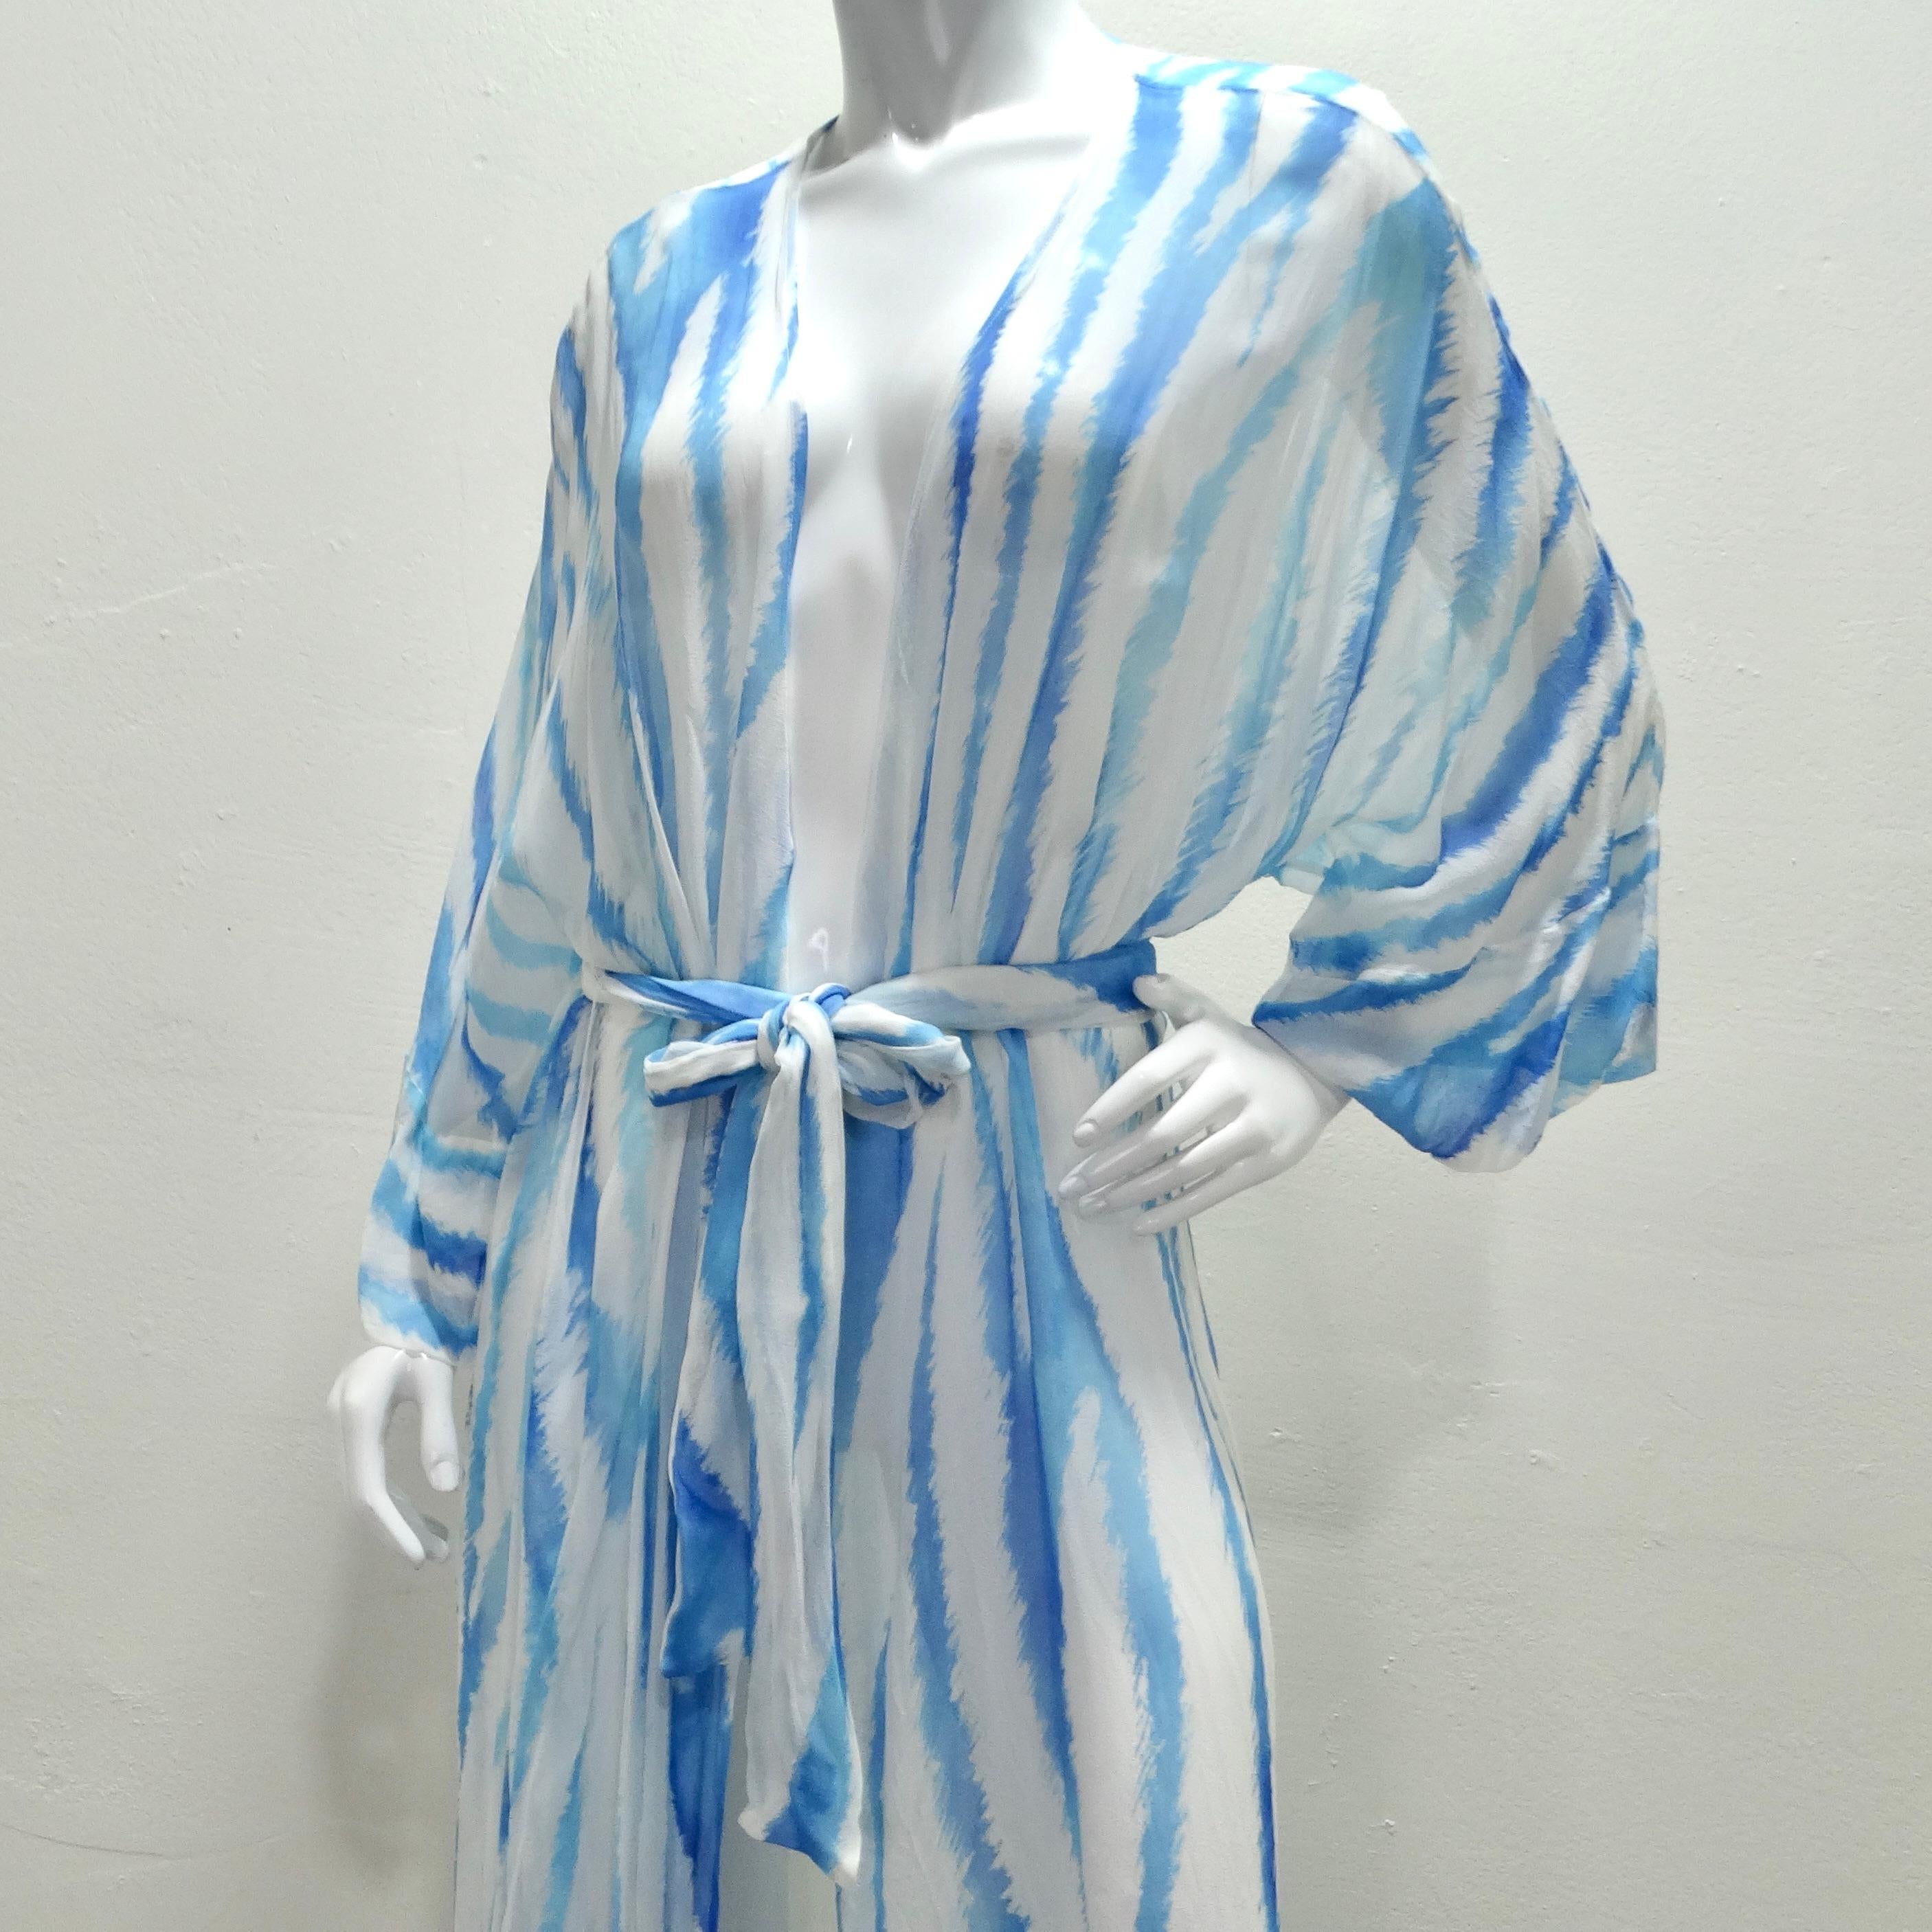 Introducing the stunning Retrofete Blue Zebra Silk Chiffon Robe, a versatile and luxurious piece that effortlessly transitions from beachside chic to evening glamour. Crafted from sheer silk chiffon, this airy maxi silhouette exudes elegance and